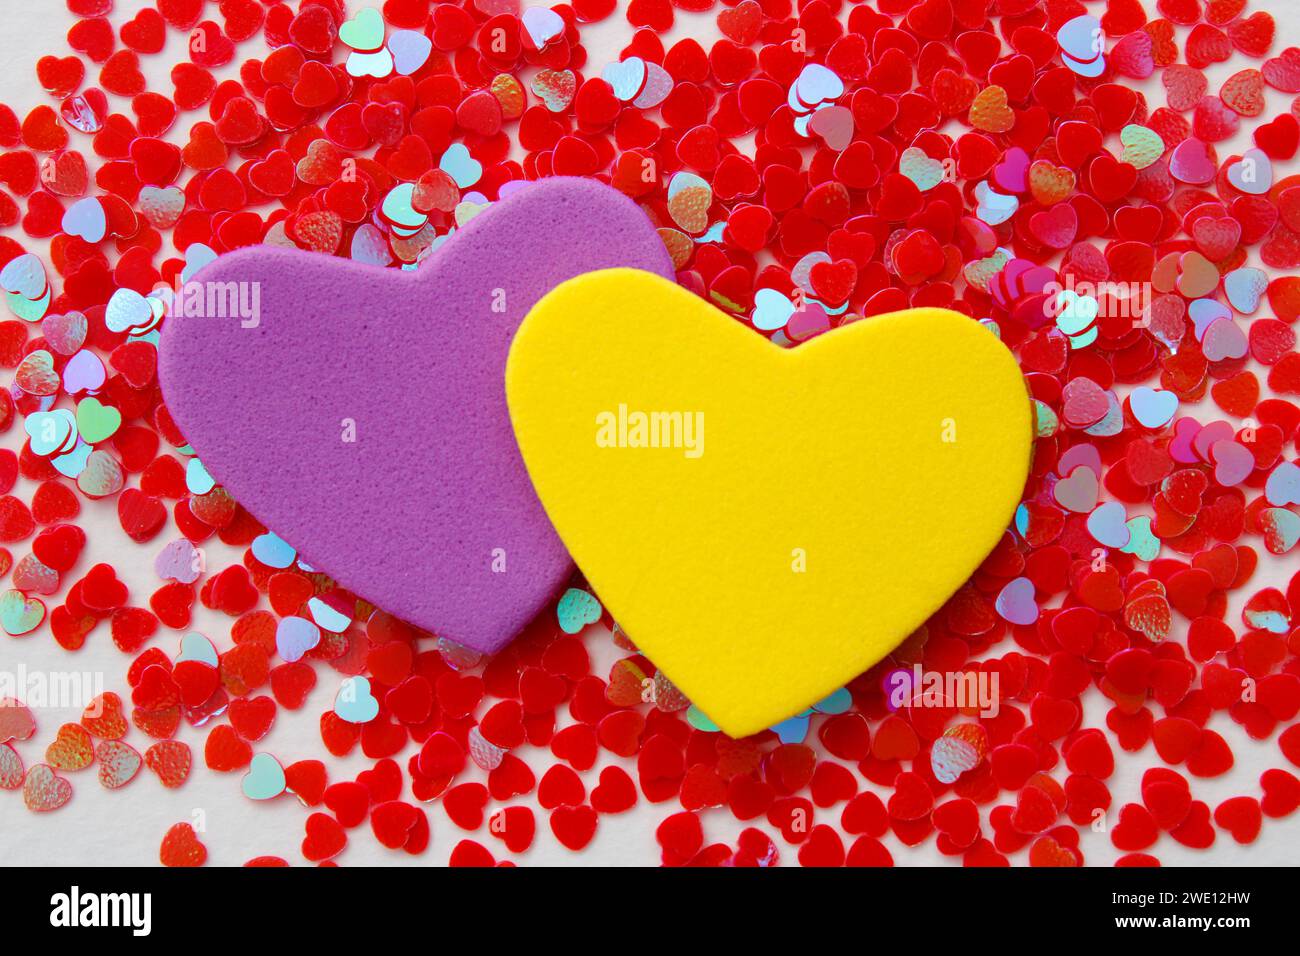 Pair of purple and yellow hearts on group of small hearts Stock Photo